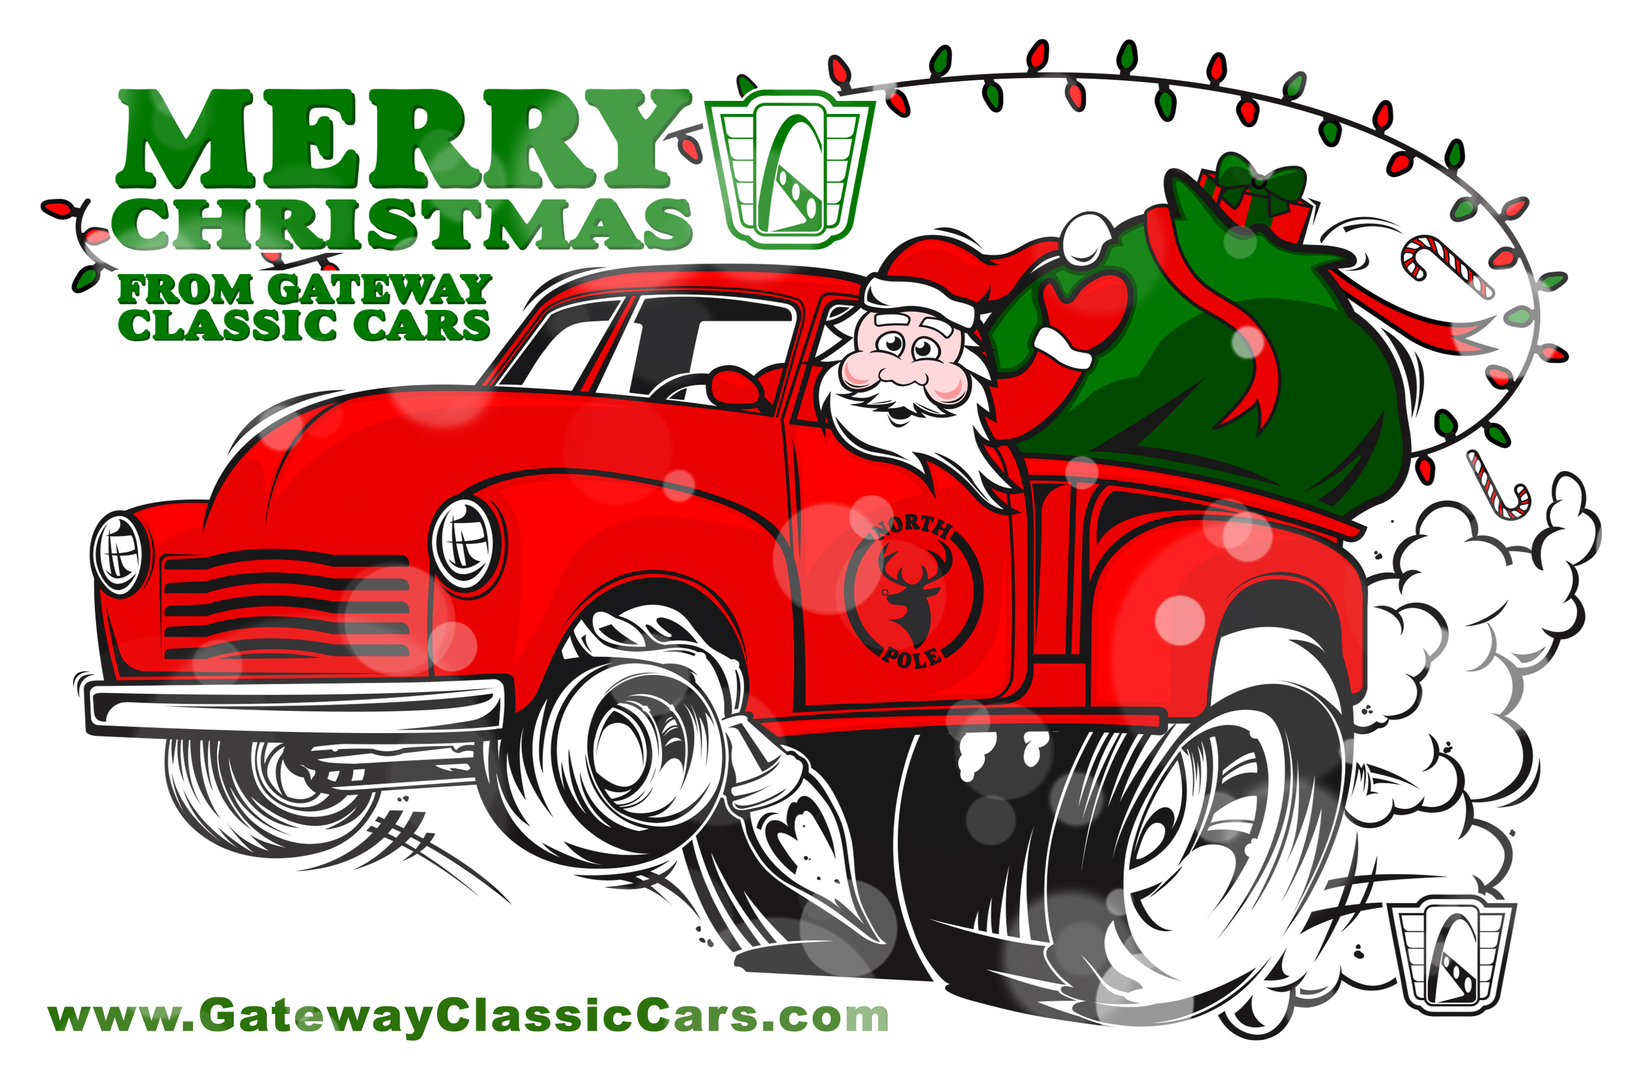 Holiday Party - Gateway Classic Cars of Fort Lauderdale, Coral Springs, Florida, United States